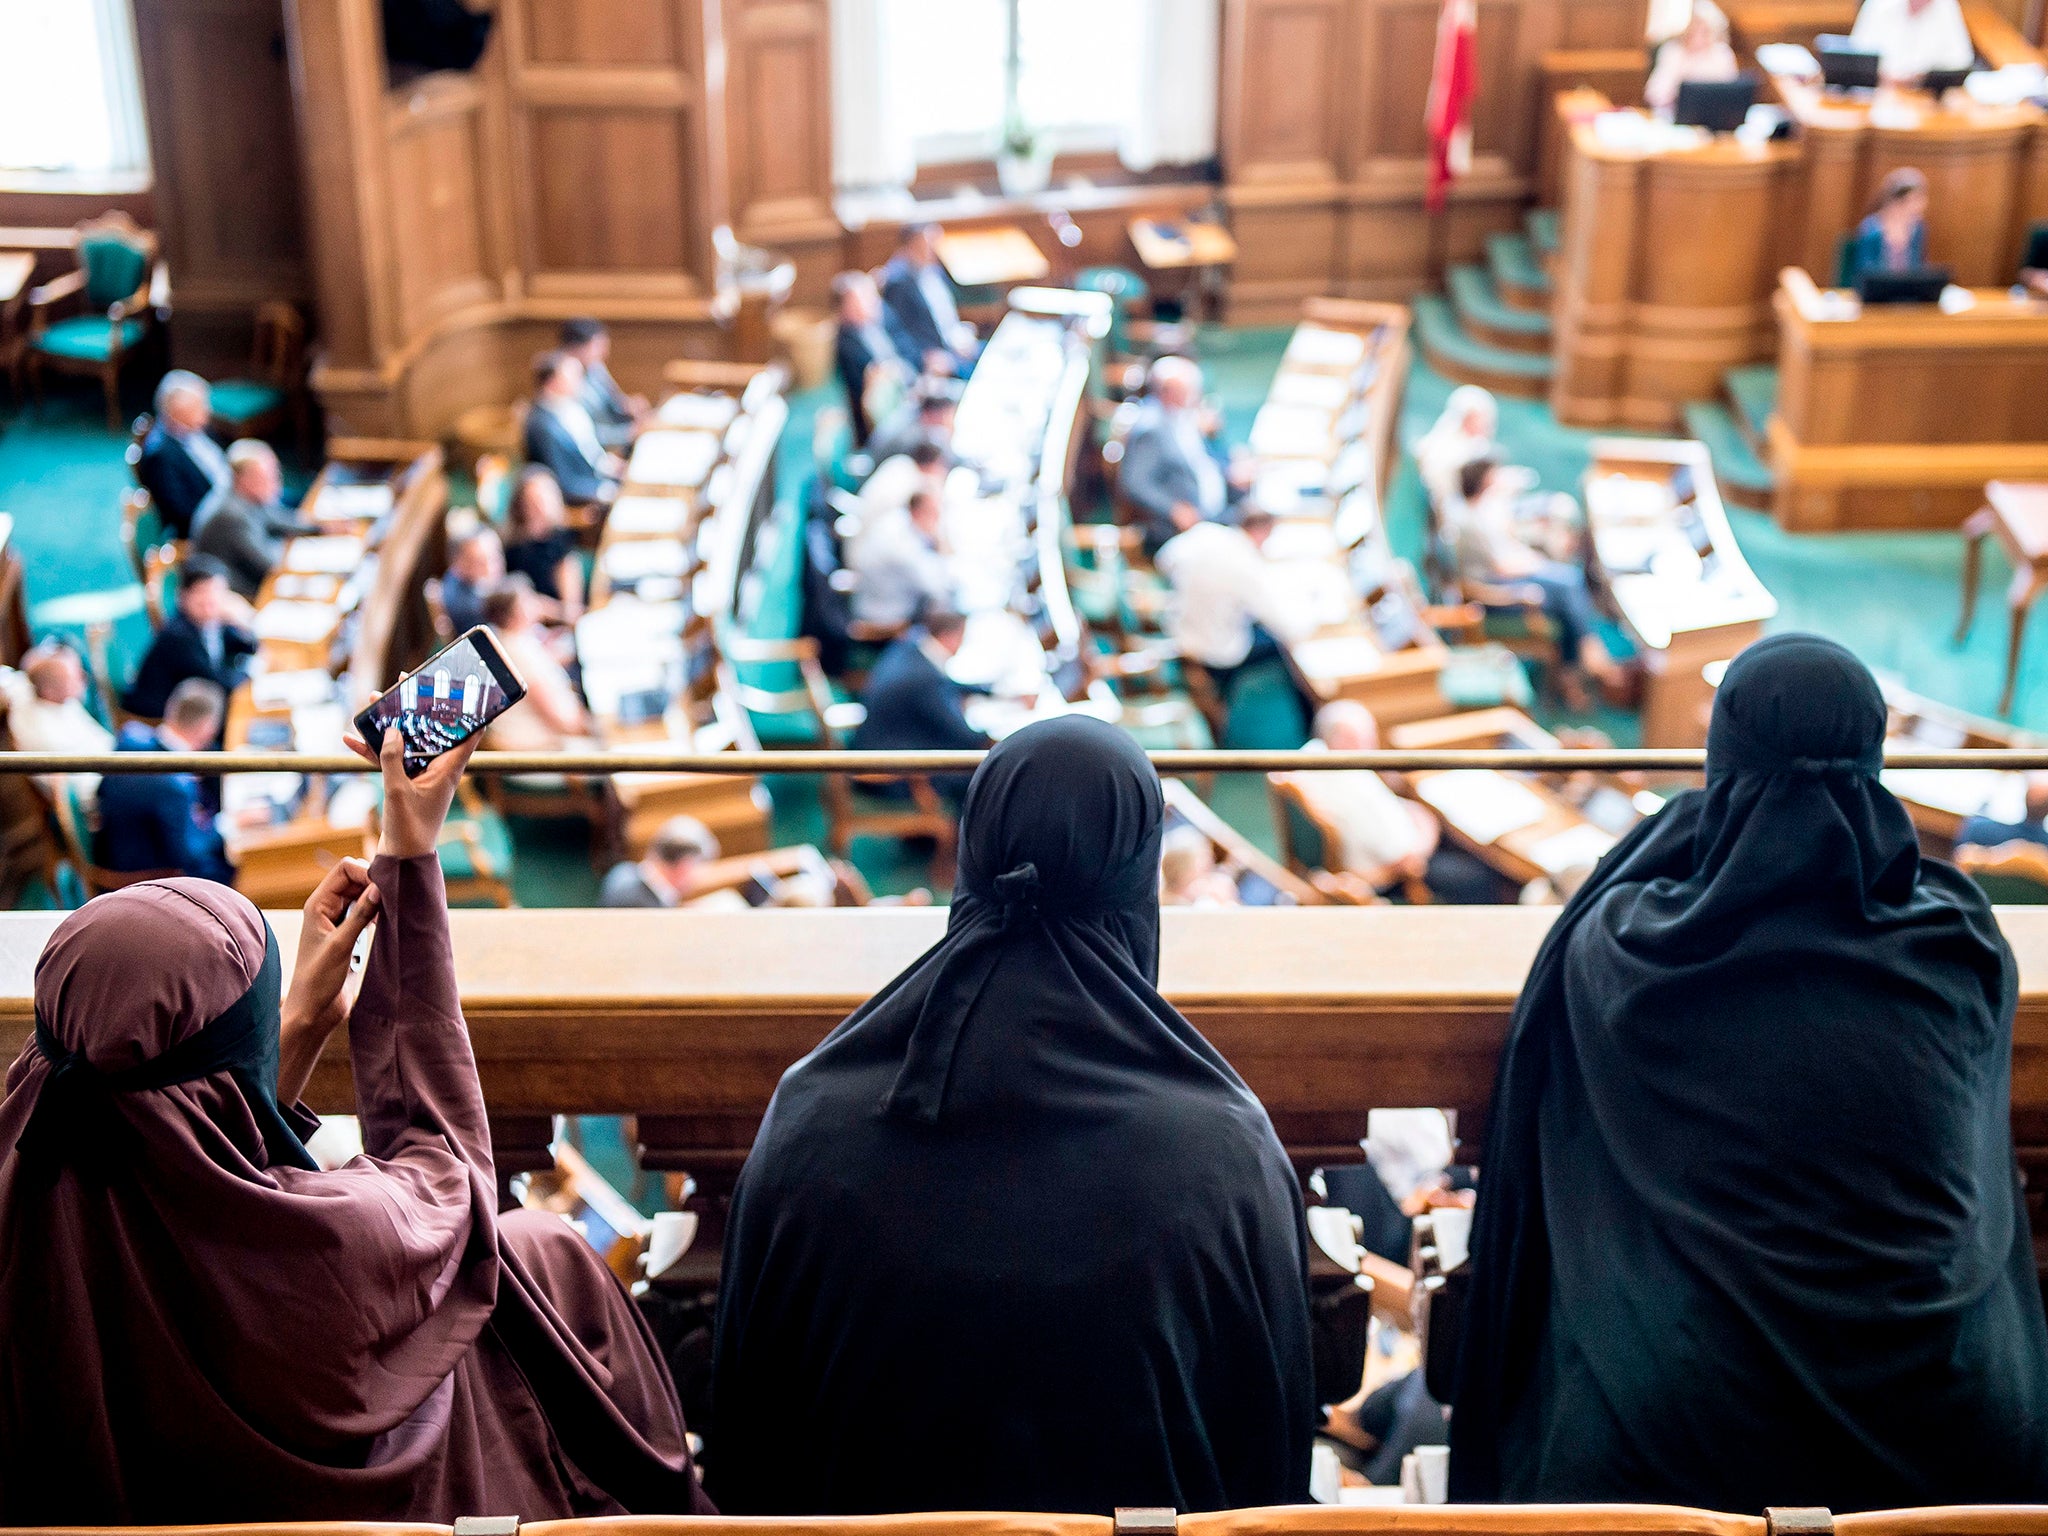 Women wearing niqab sit in the audience at the Danish Parliament in Copenhagen